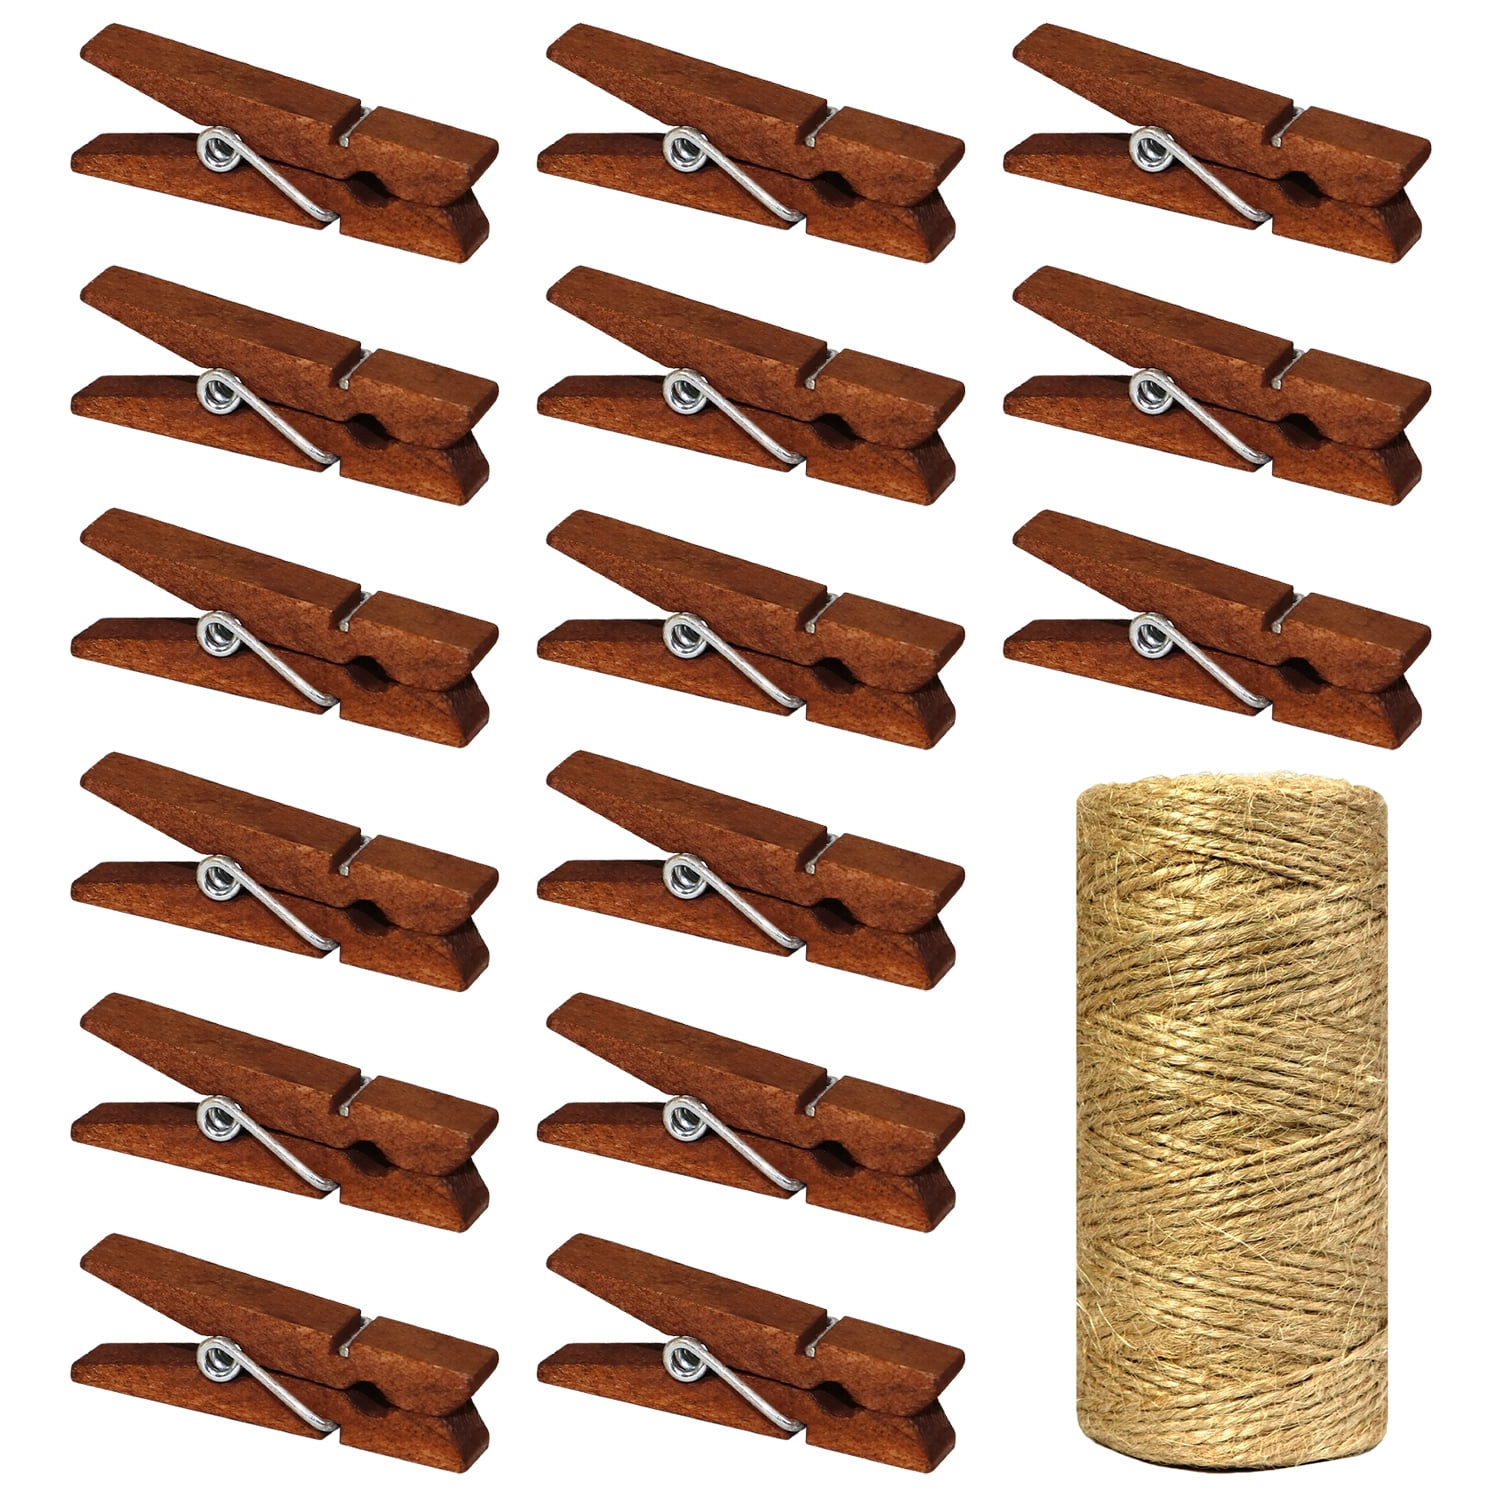 NOLITOY 50pcs Craft Peg Pins Photo Clips with Rope Mini Pegs for Photos  Mini Photo Clip Wood Clothespin Ornament Picture Photo Pegs Natural